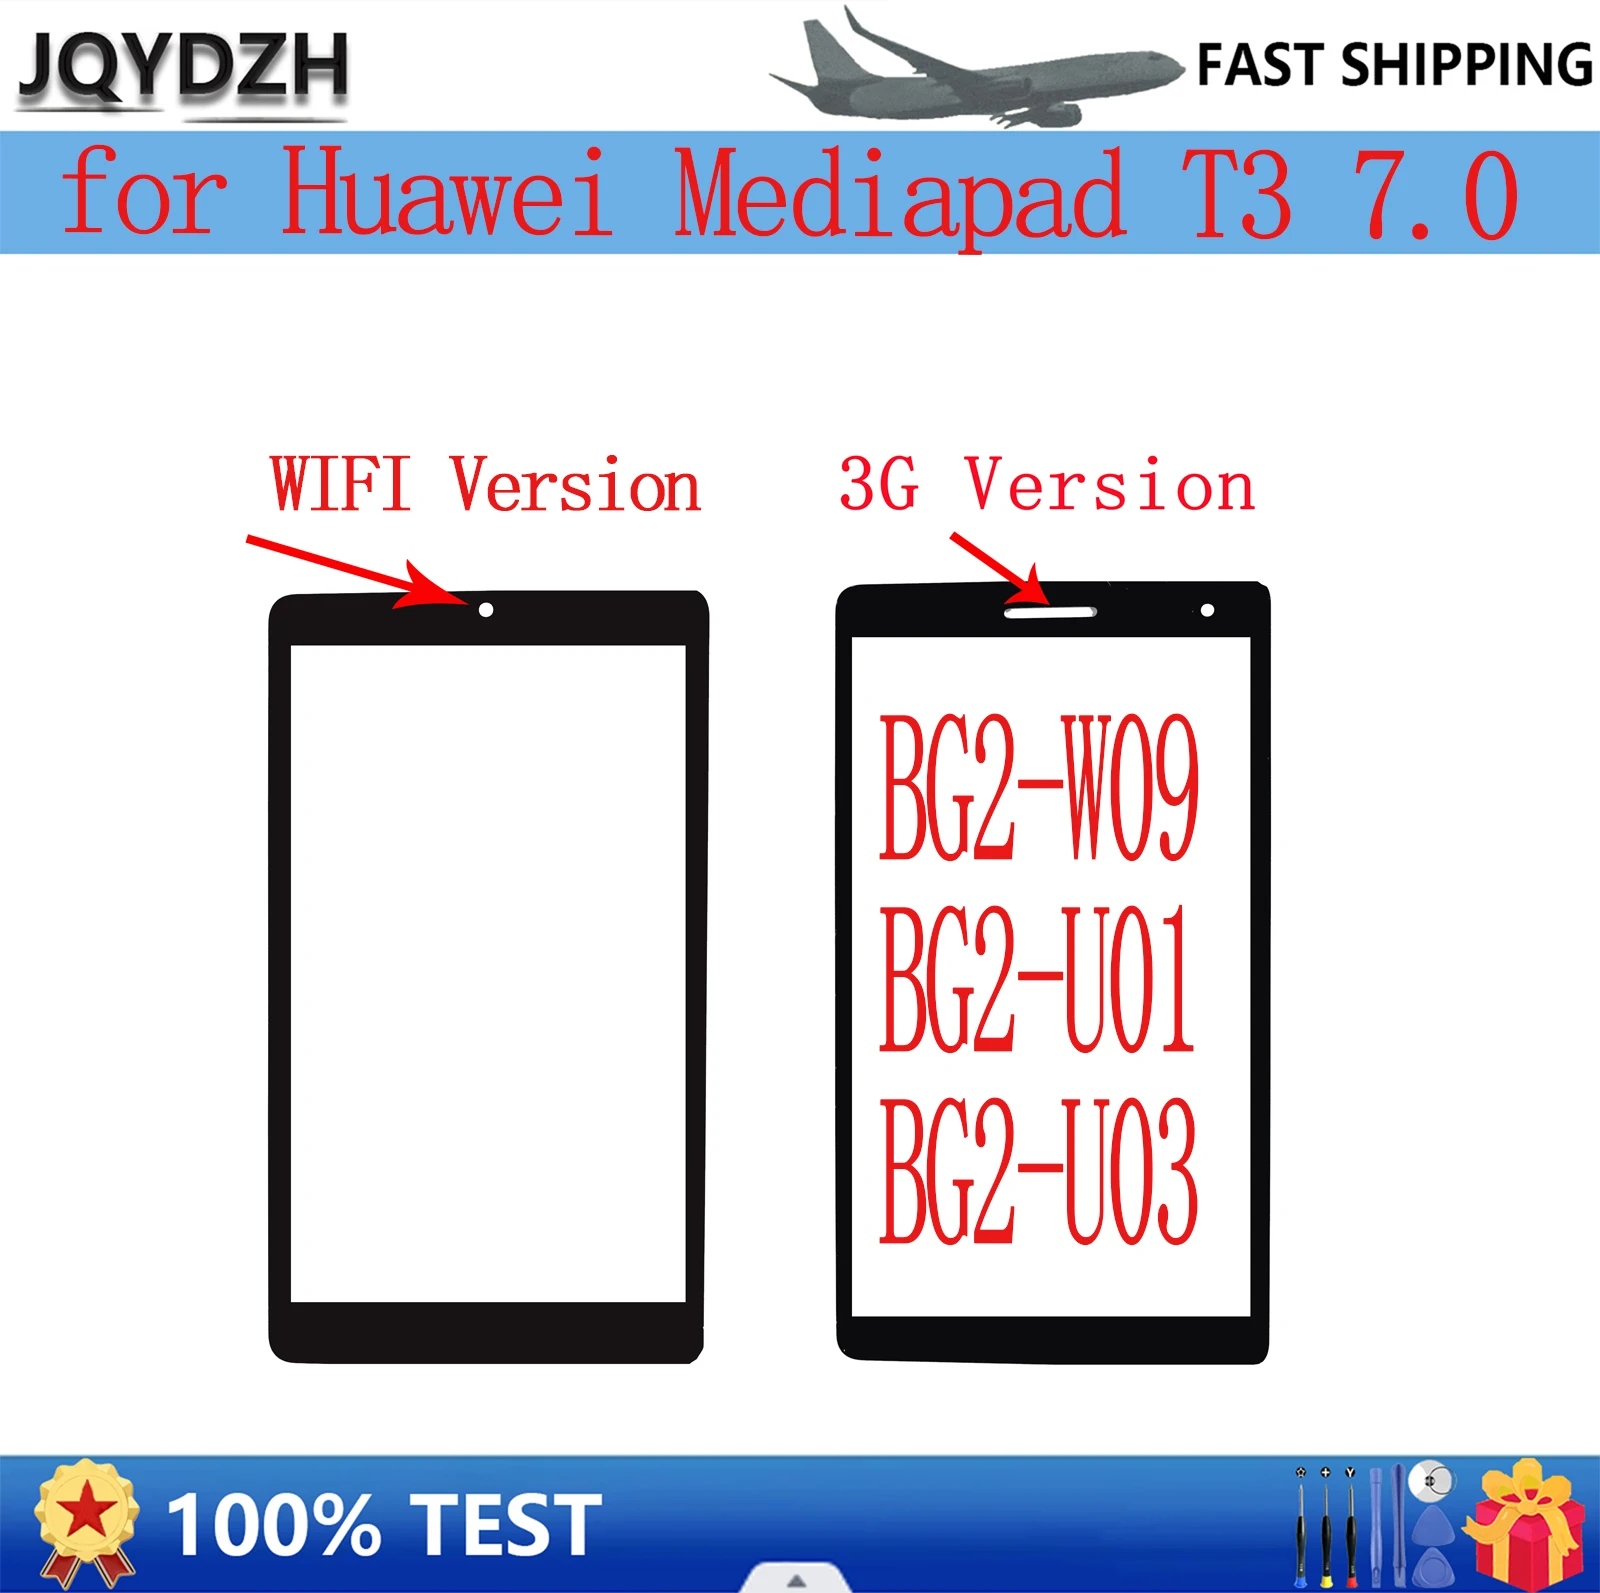 

JQYDZH For Tested front glass outer glass lens panel replacement for Huawei Mediapad T3 7.0 BG2-W09 BG2-U01 BG2-U03 3G Wifi